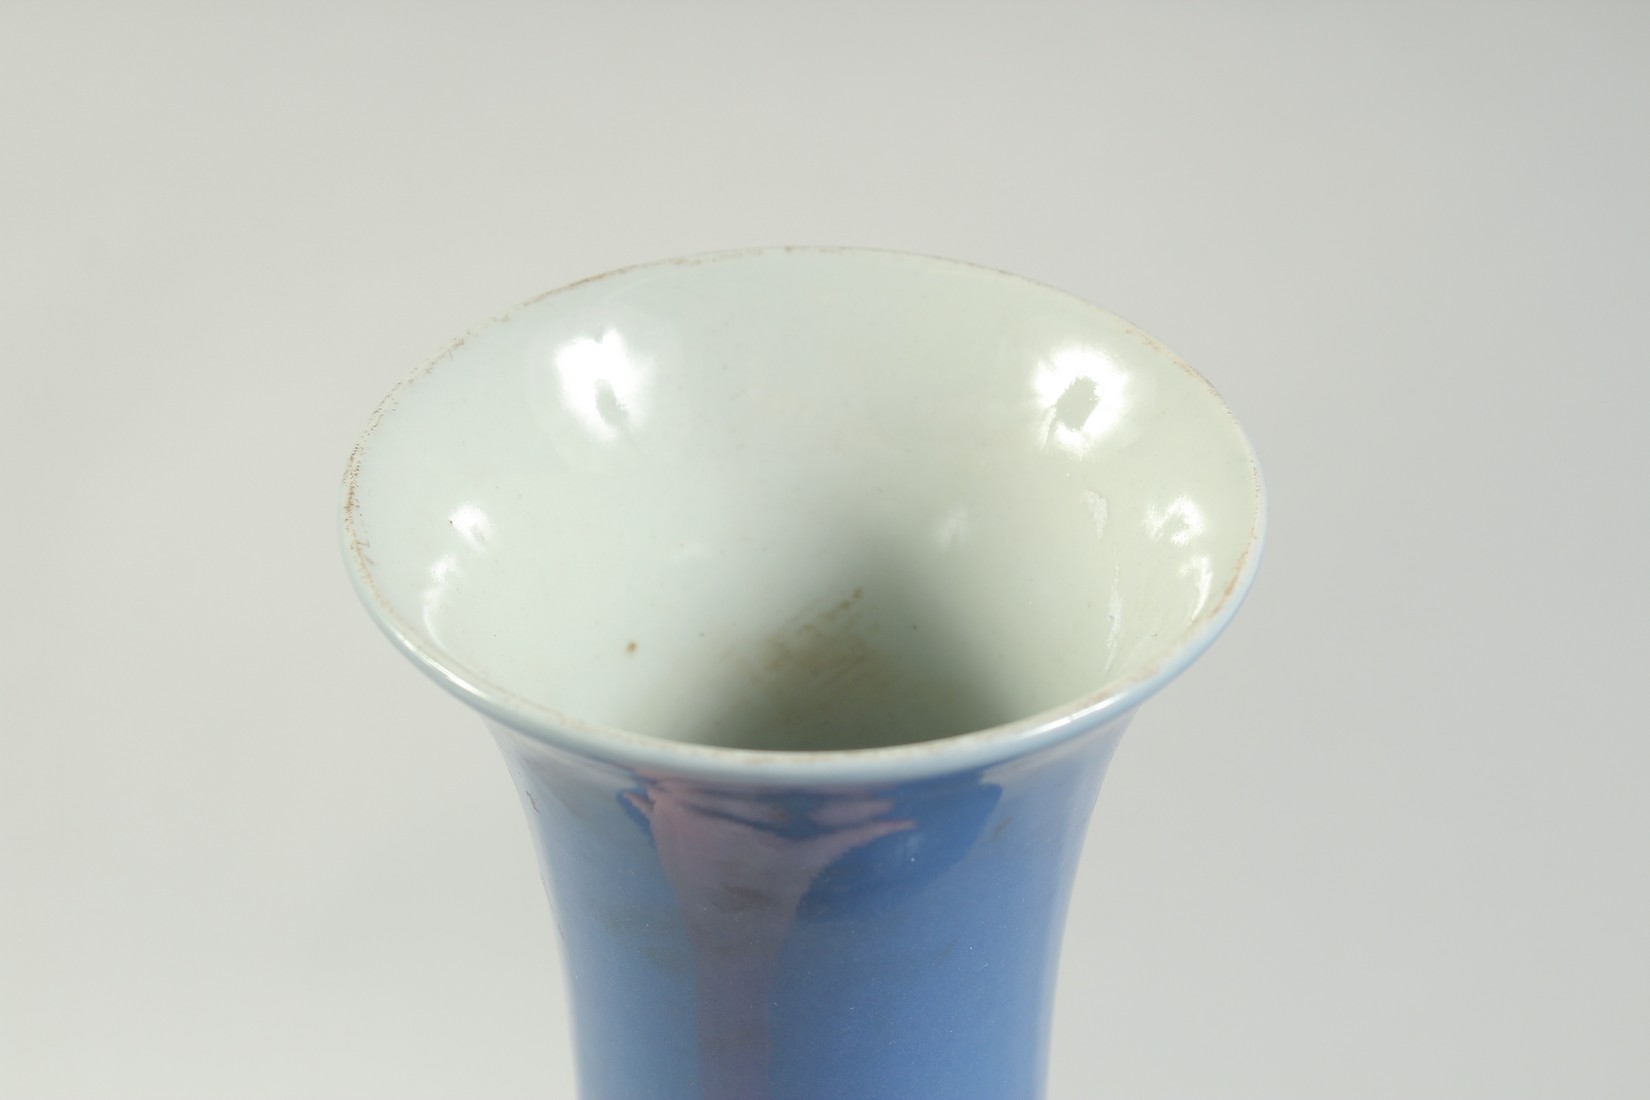 A CHINESE PORCELAIN BLUE BULBOUS VASE. 13ins high. - Image 3 of 4